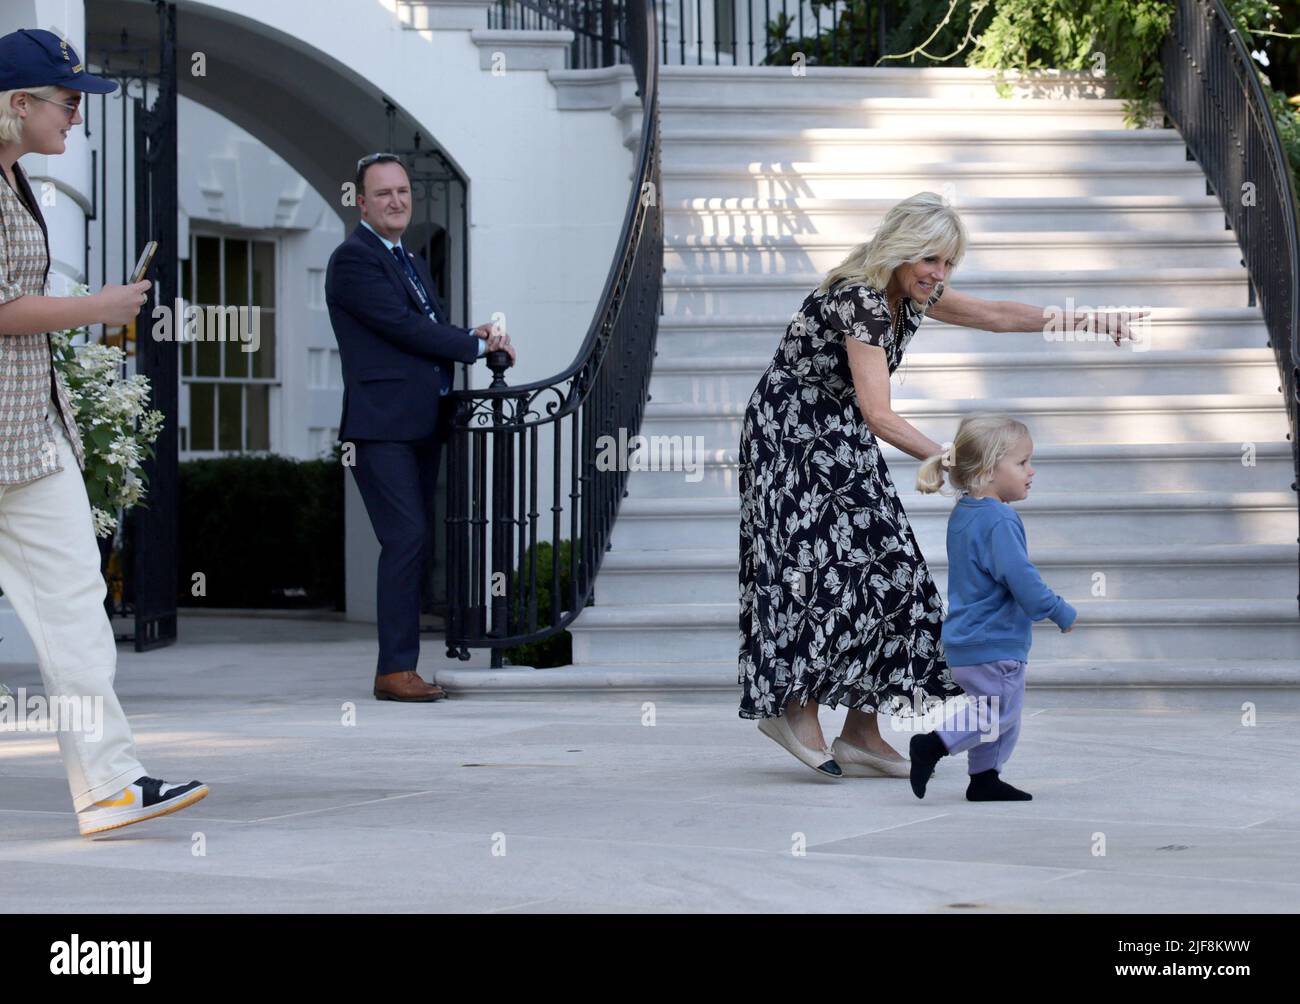 Maisy Biden and First Lady Jill Biden take Beau Biden to see U.S. President Joe Biden after his arrival at the White House following the President's trip to Europe, in Washington, U.S., June 30, 2022. REUTERS/Evelyn Hockstein Stock Photo